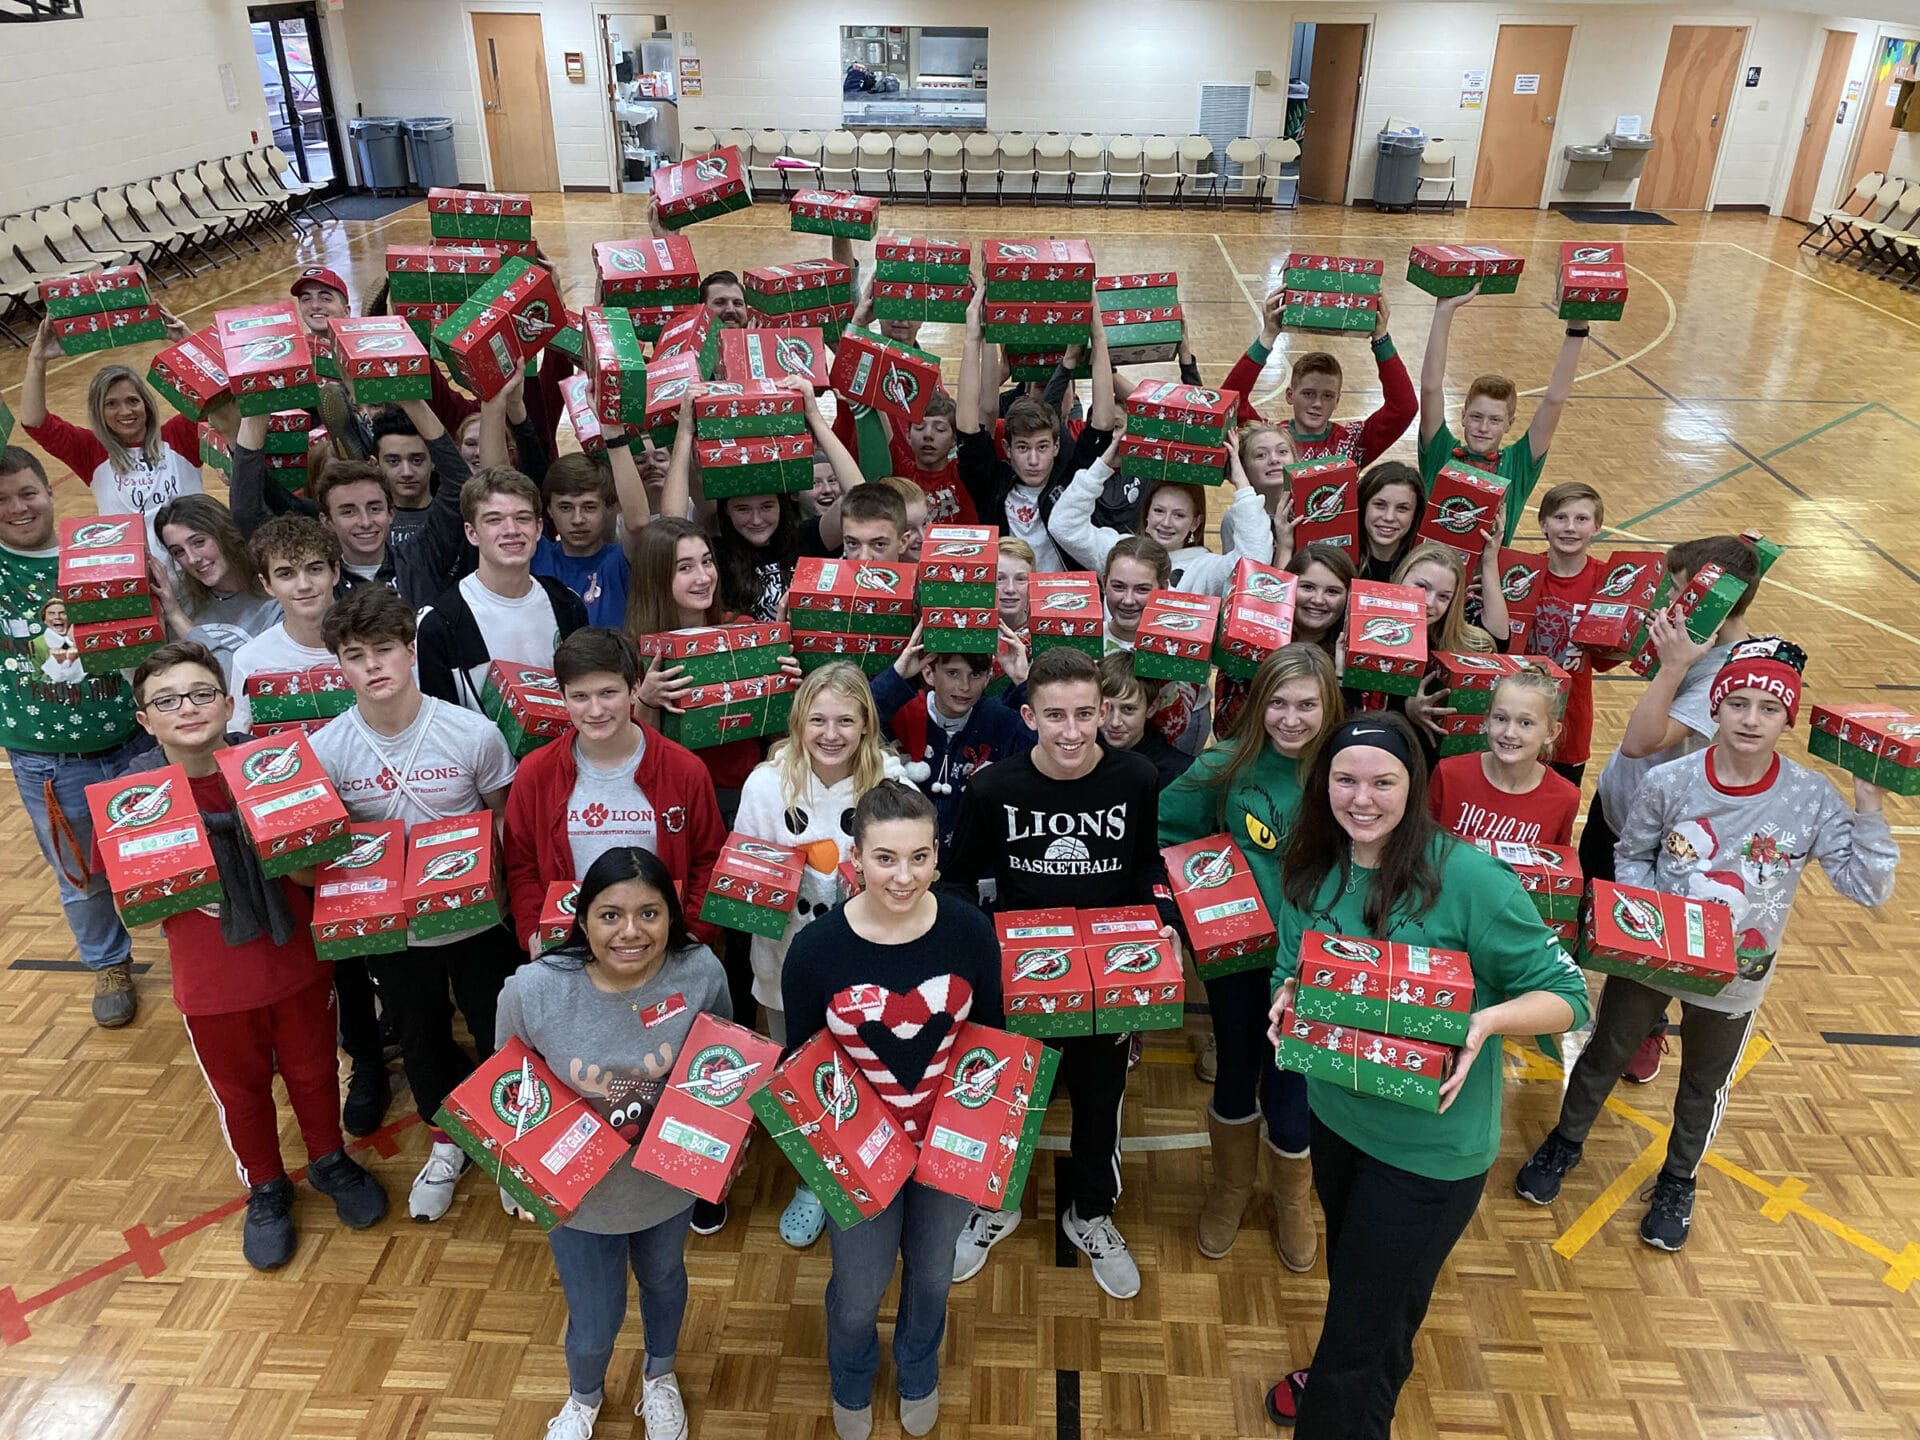 Cornerstone Christian Academy Assembles 200 Shoeboxes in Annual Support of Operation Christmas Child